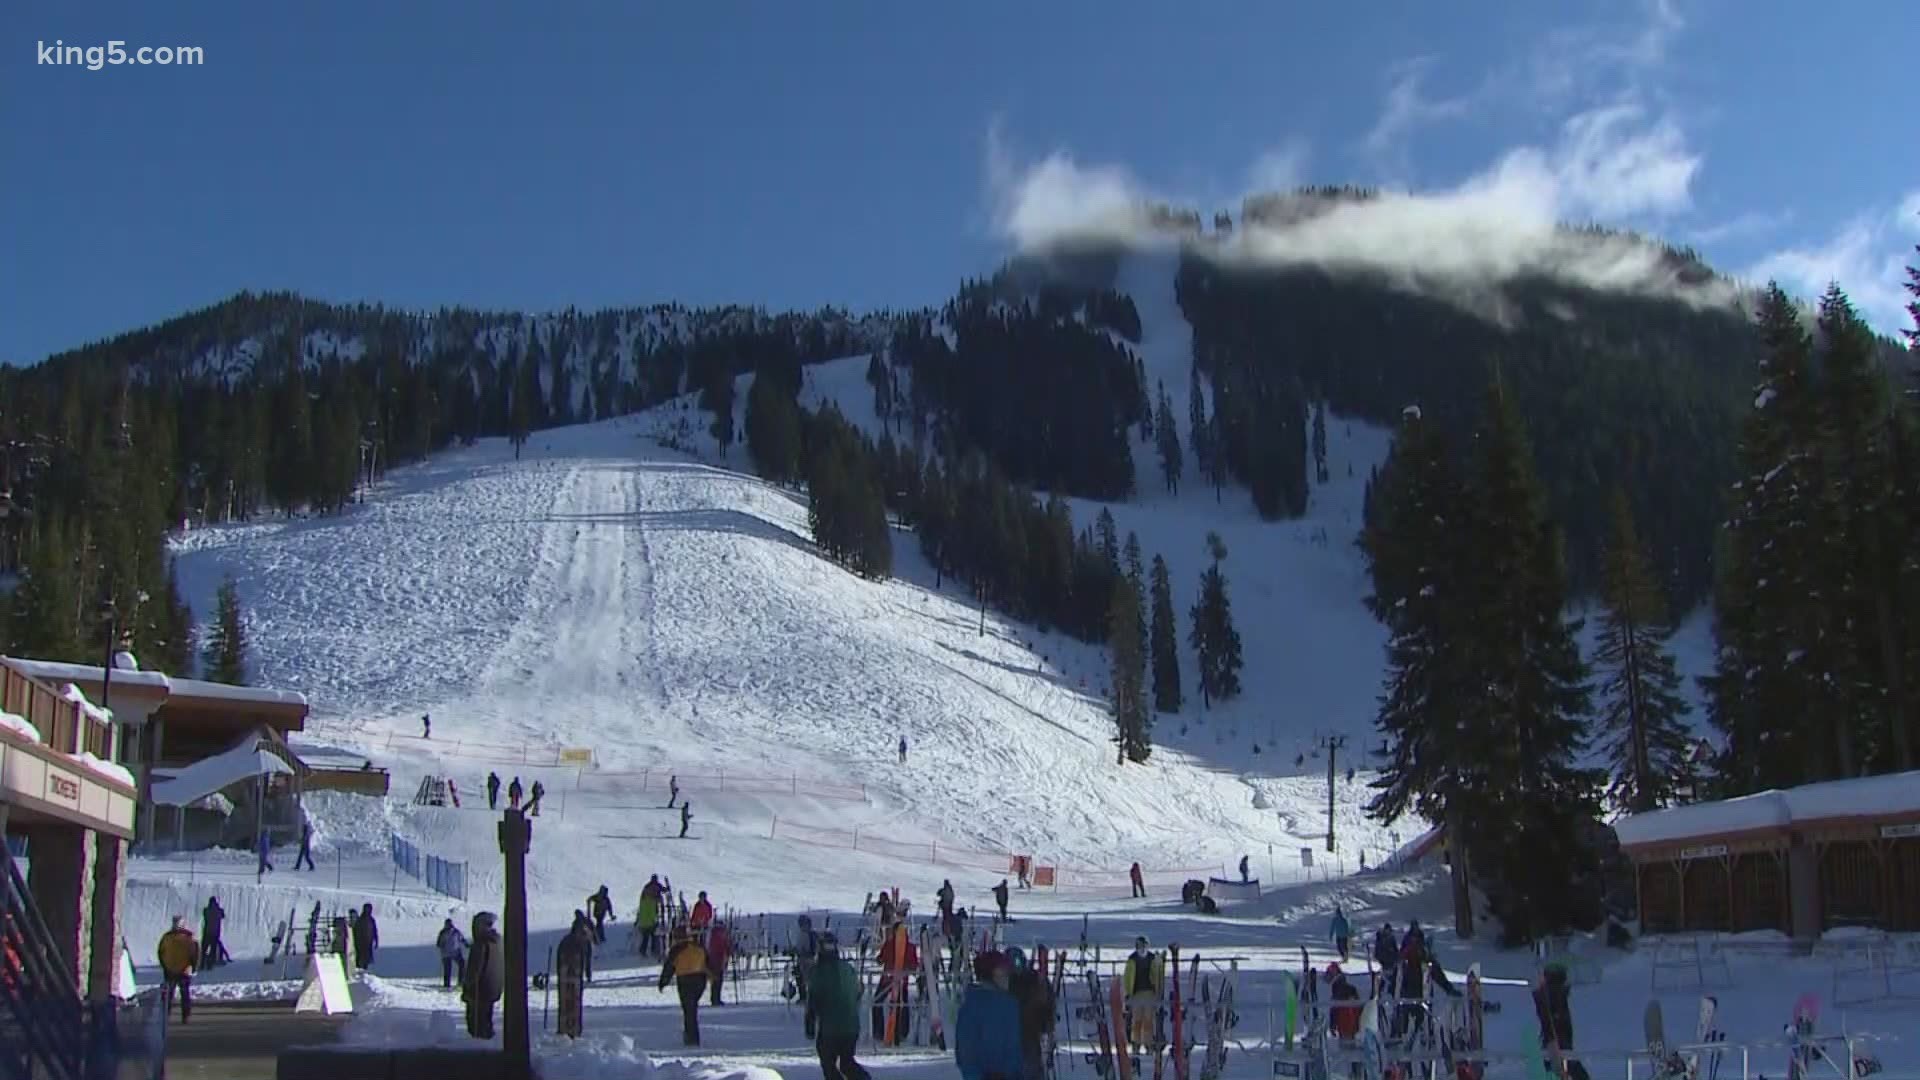 Stevens Pass and The Summit at Snoqualmie opened for the season on Friday with new restrictions in place, but there is an upside to some of the changes.